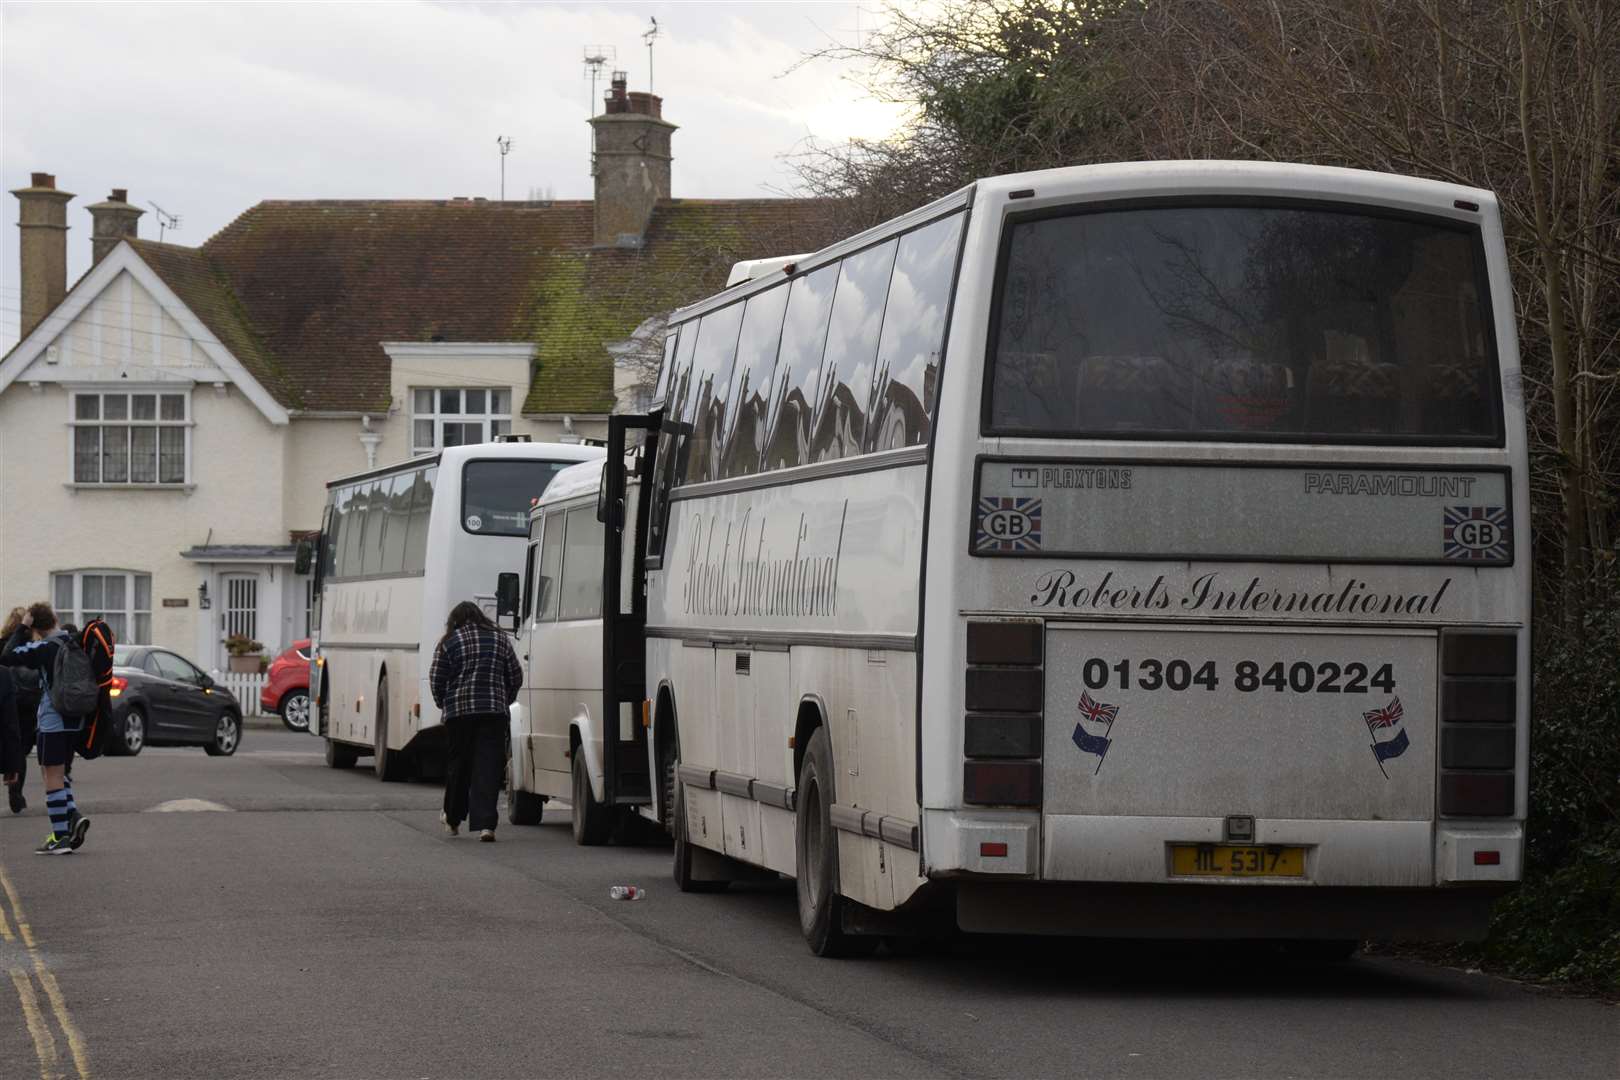 Coaches parked in Manwood Road near Sir Roger Manwood's School